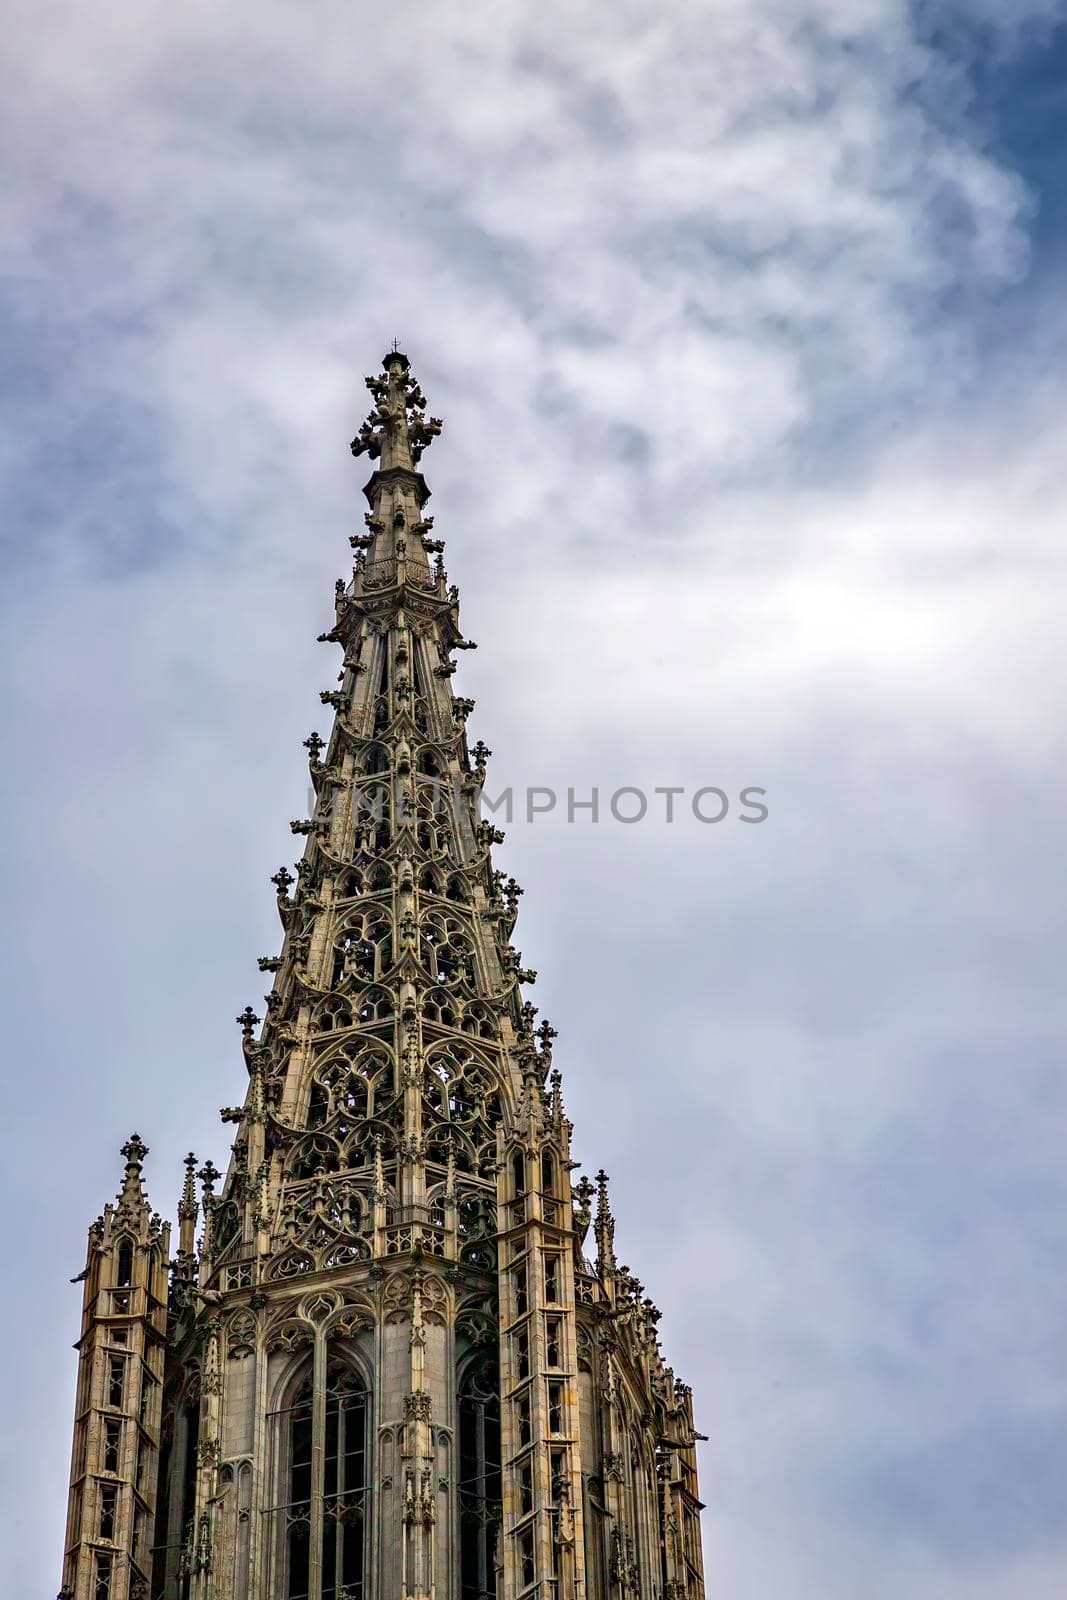 Architecture detail, the tower window of the church in Ulm, Germany by EdVal